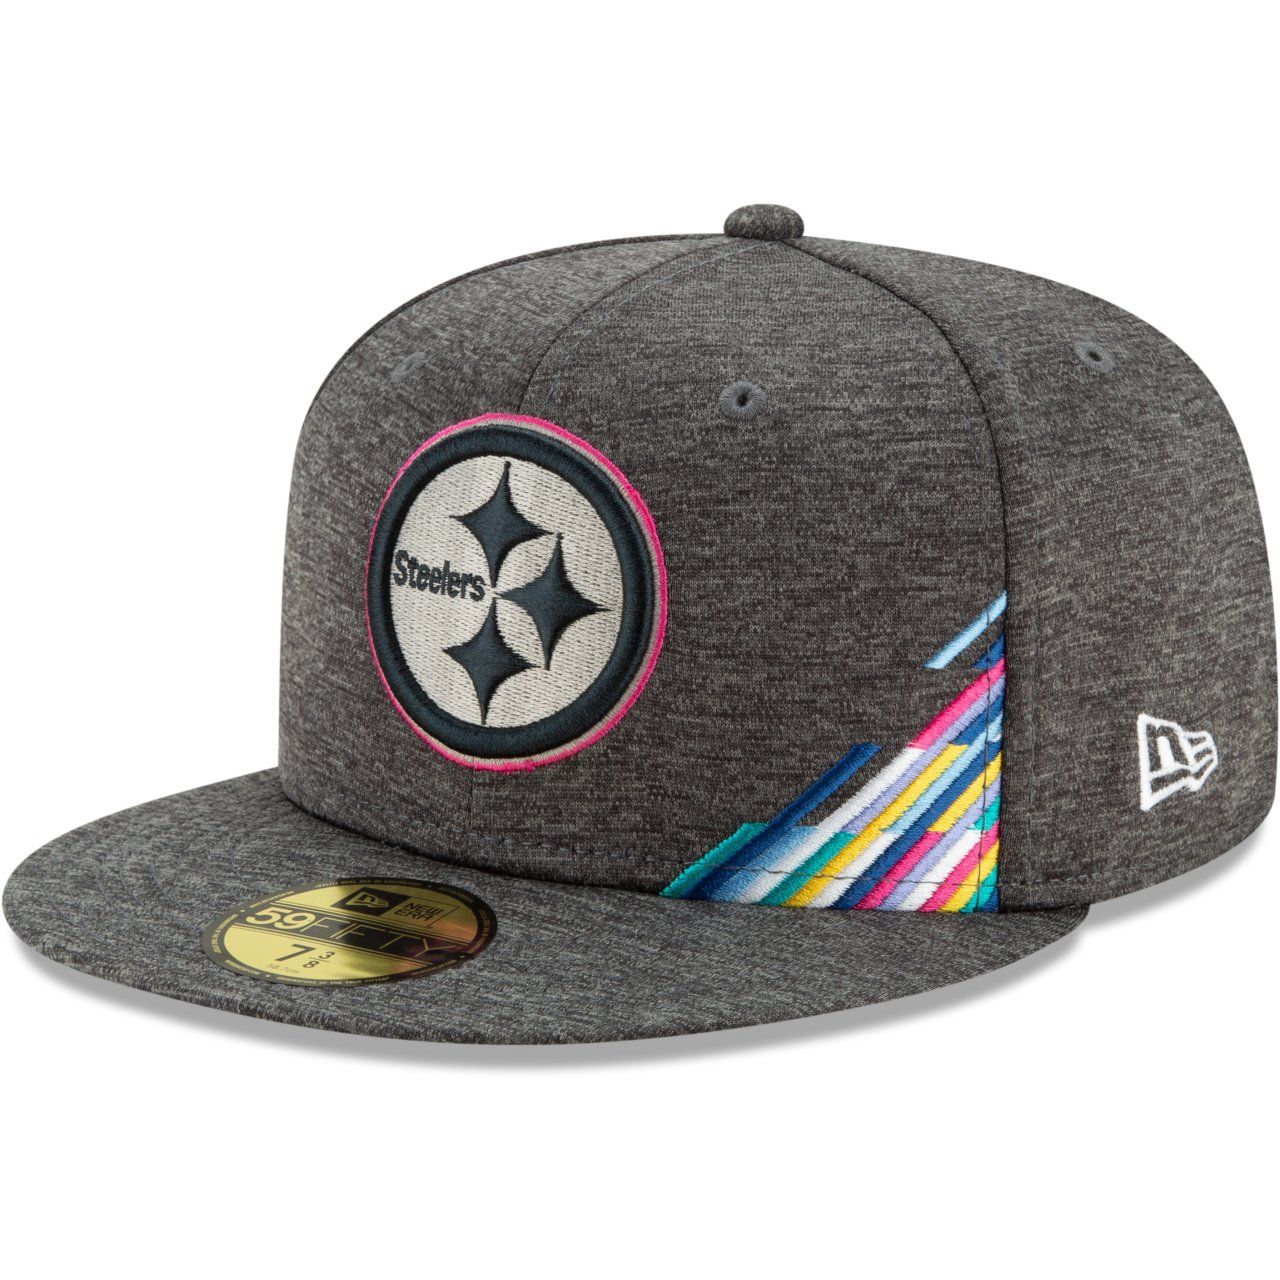 New Era 59Fifty Fitted Cap CRUCIAL CATCH Pittsburgh Steelers